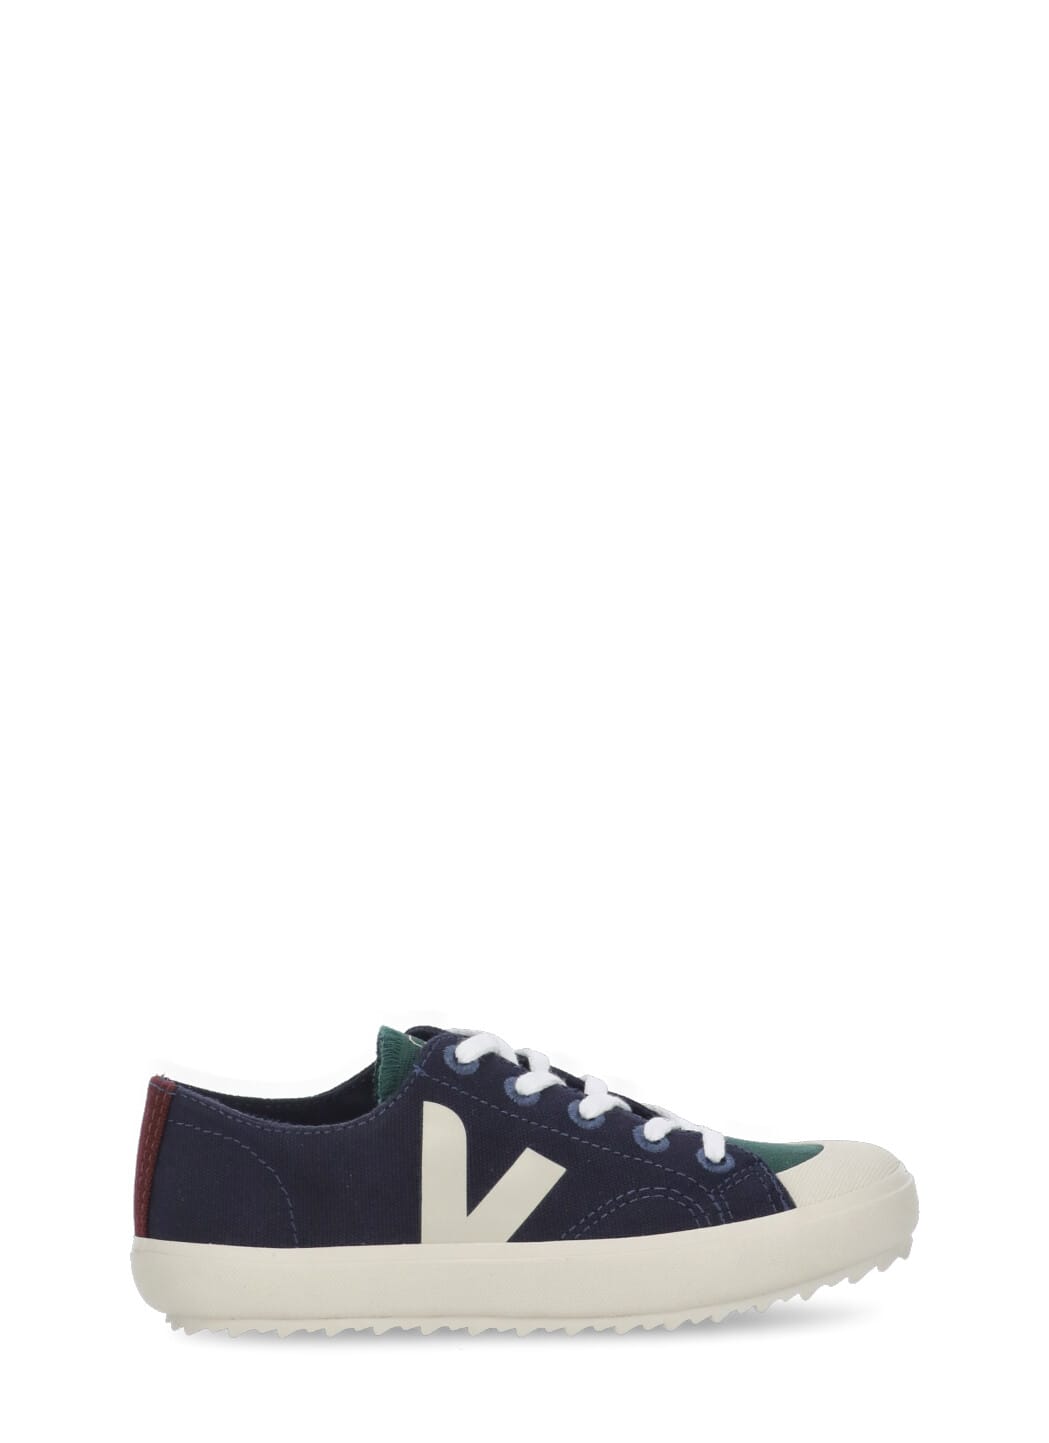 Veja Small Flip Canvas Sneakers